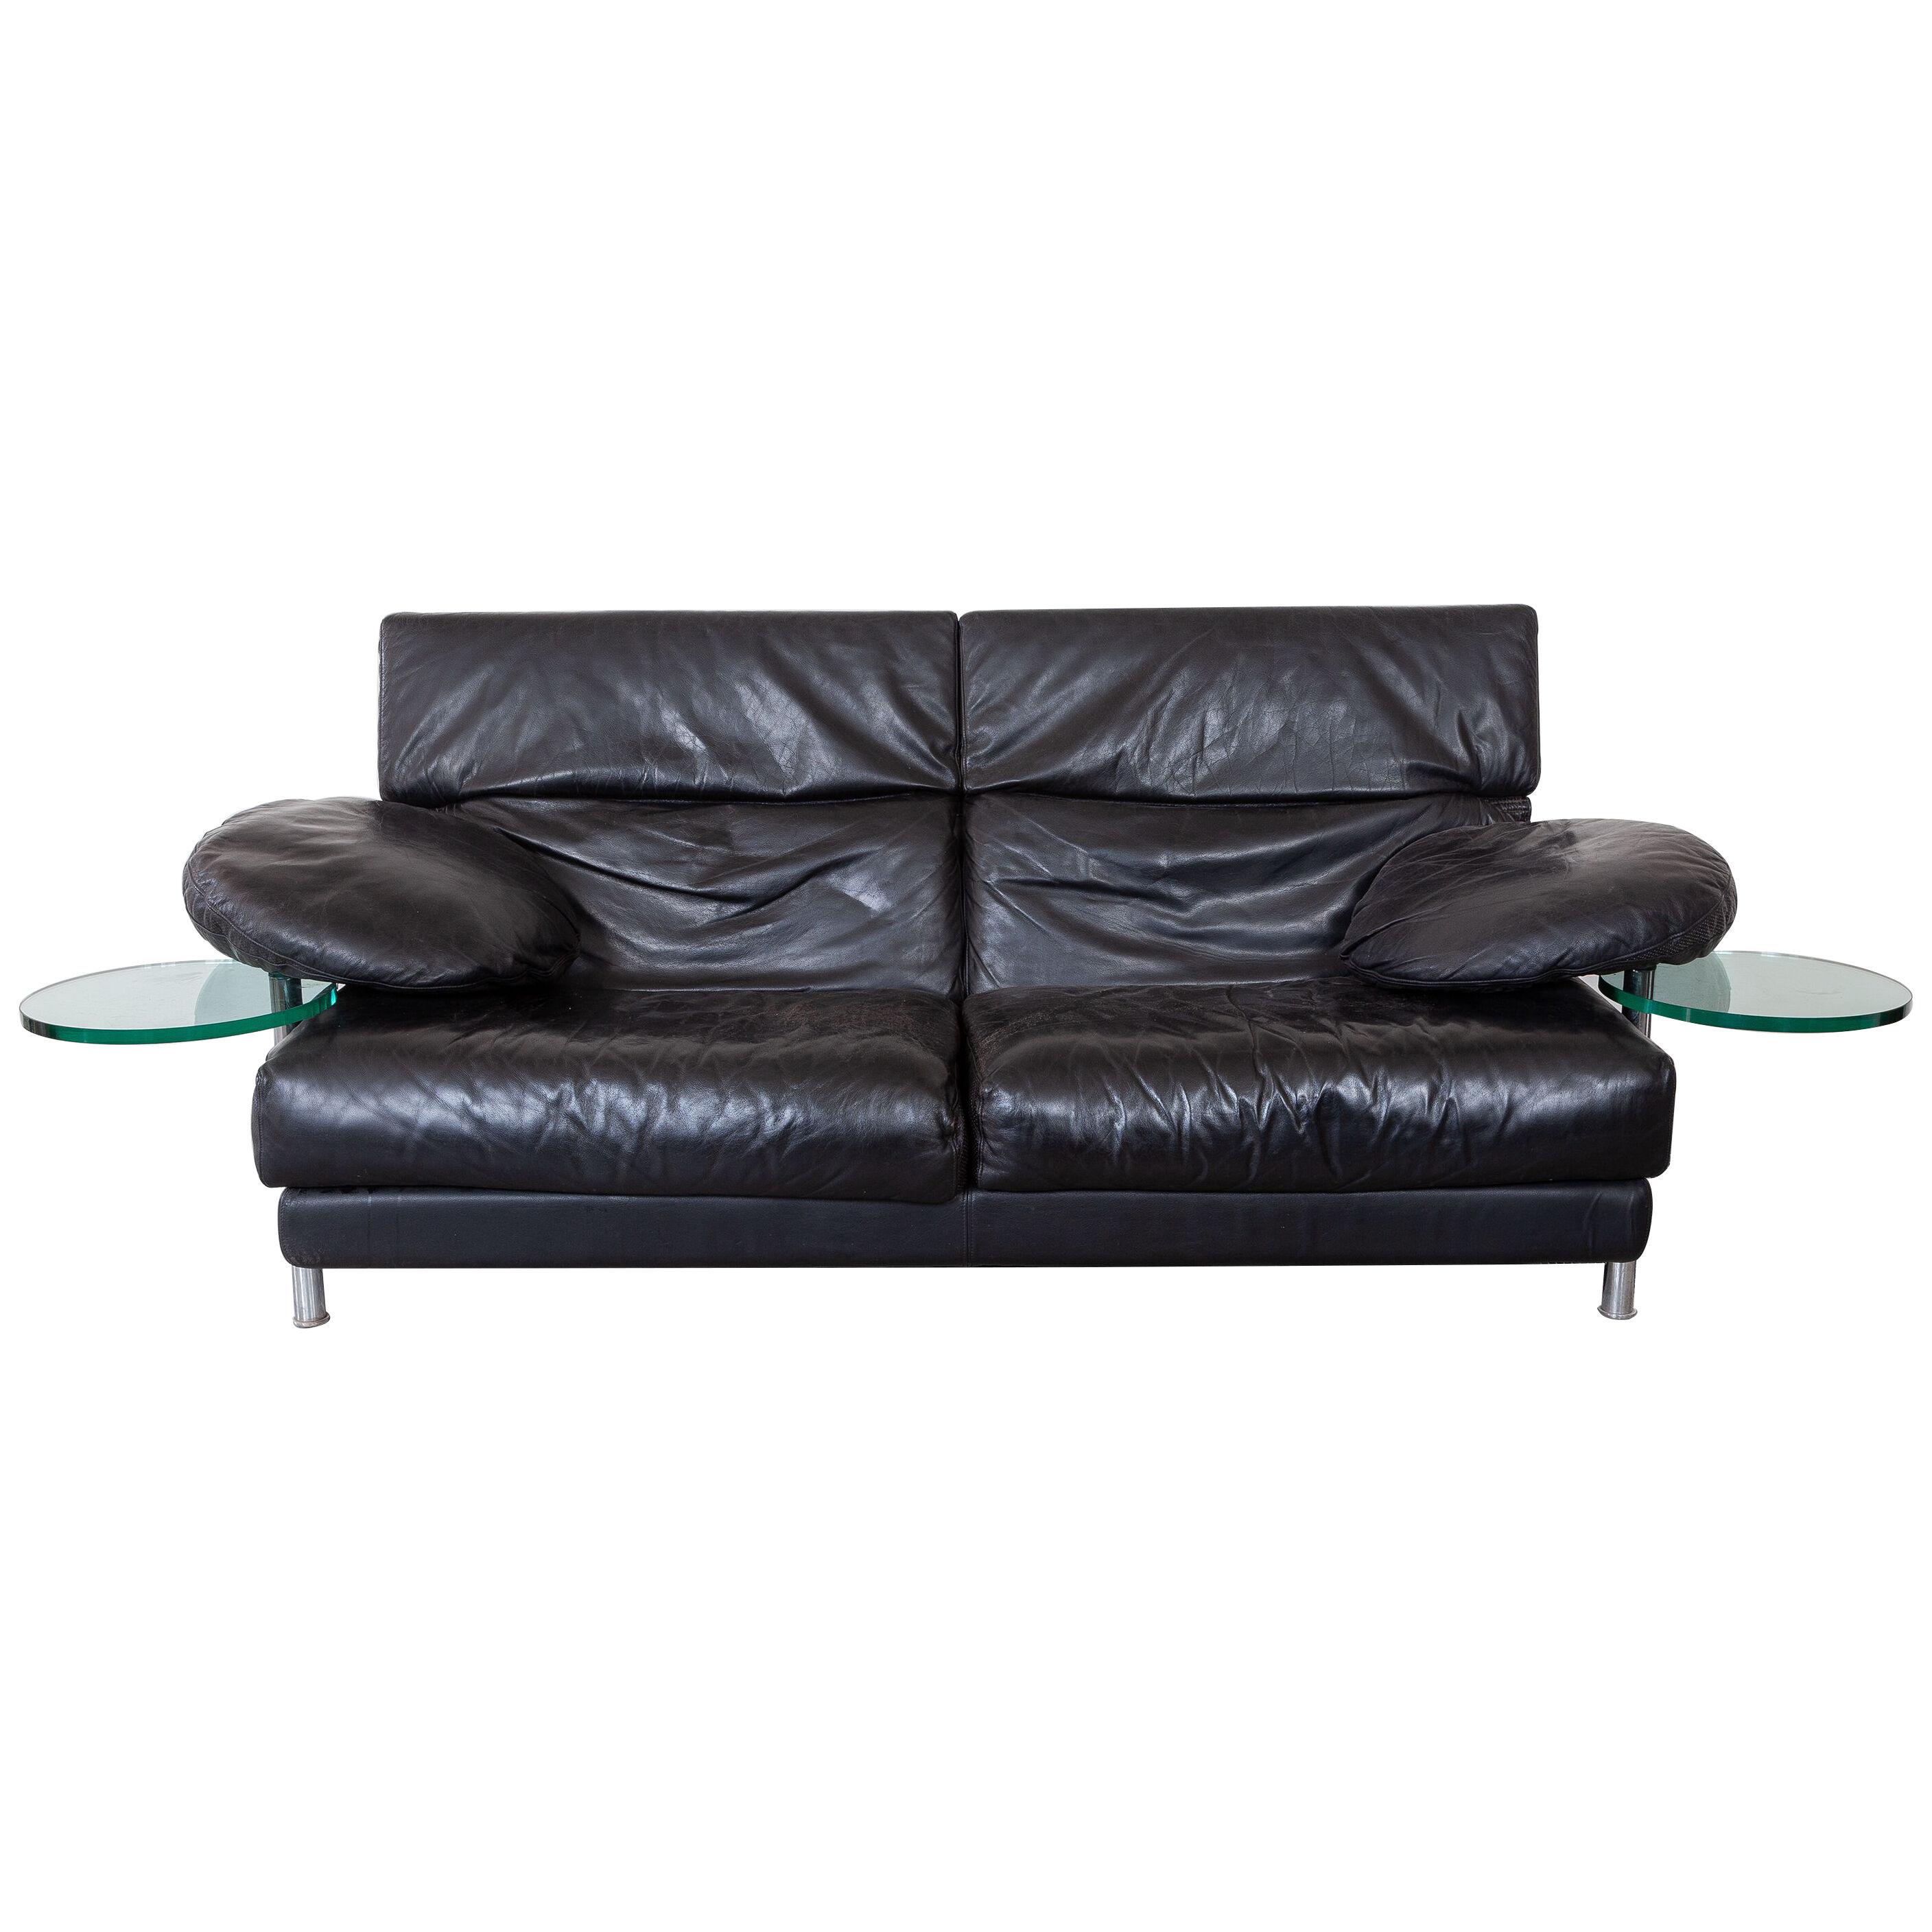  Black Leather 1980s Sofa designed by Paolo Piva "Model ARCA" for B&B, Italy